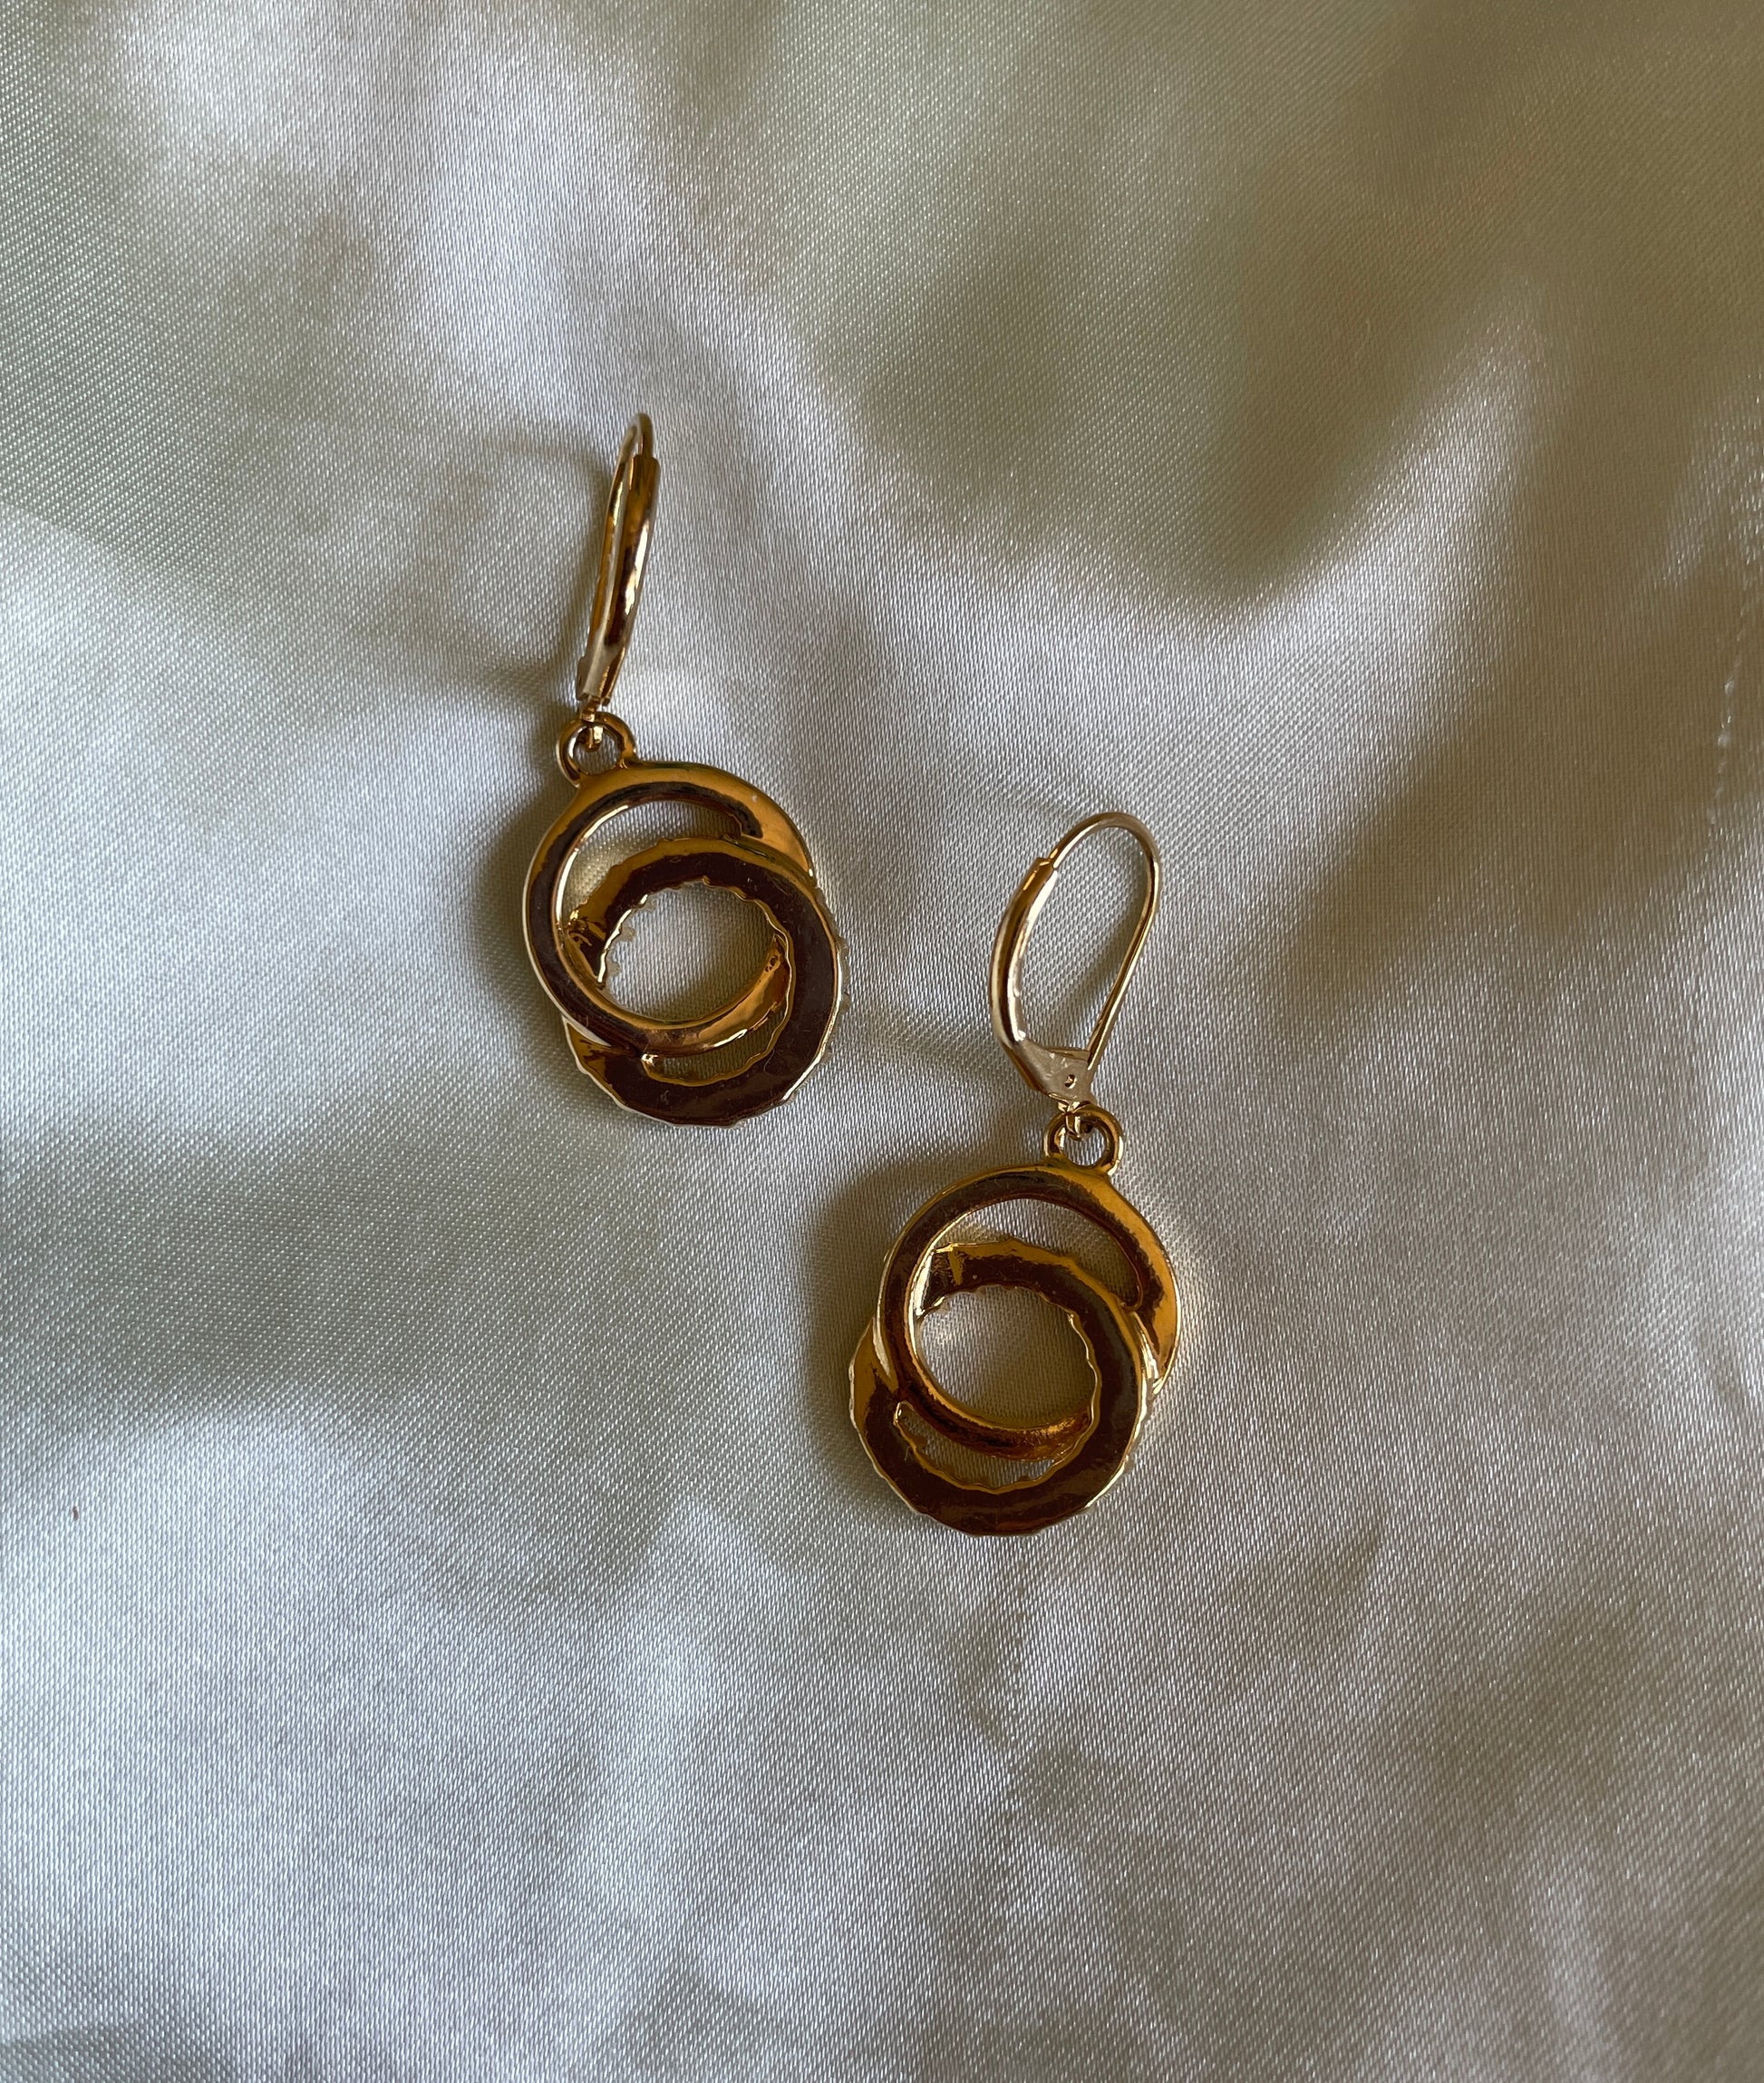  2000s Gold Tone Double Circle Iridescent Crystal Lever Back Pierced Earrings